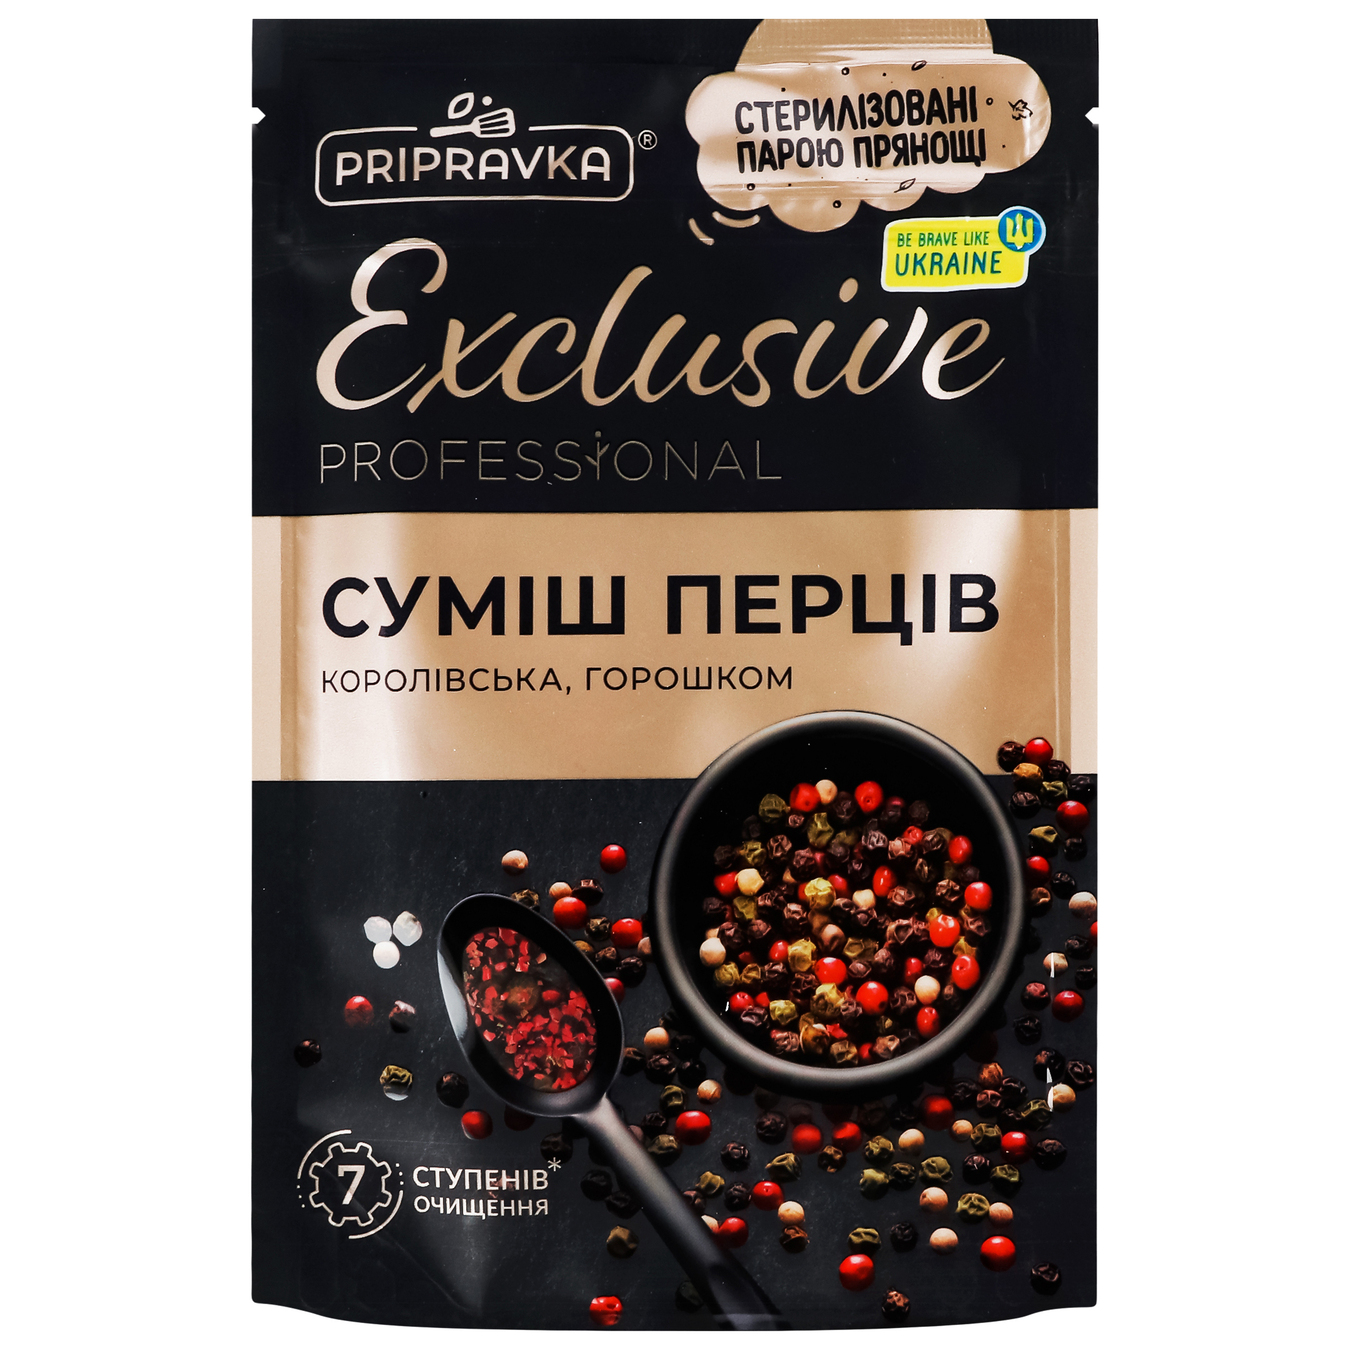 Pripravka Exclusive Professional royal pepper mix without salt 30g